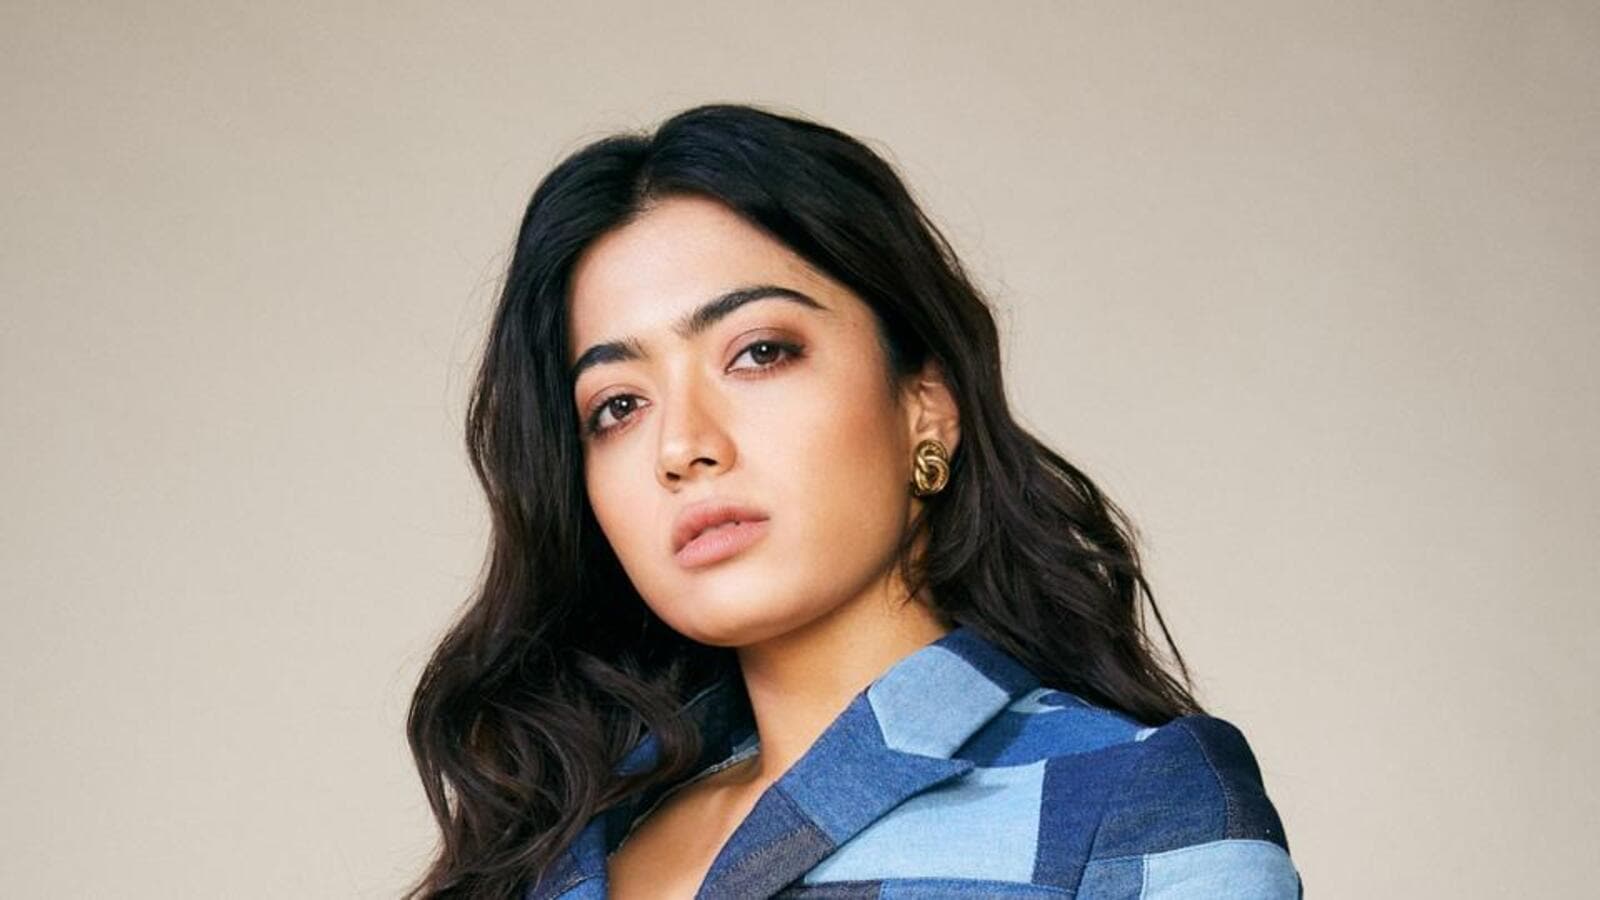 Rashmika Mandanna on Bollywood debut: Feels motivating to grab eyeballs  even before my work is out | Bollywood - Hindustan Times